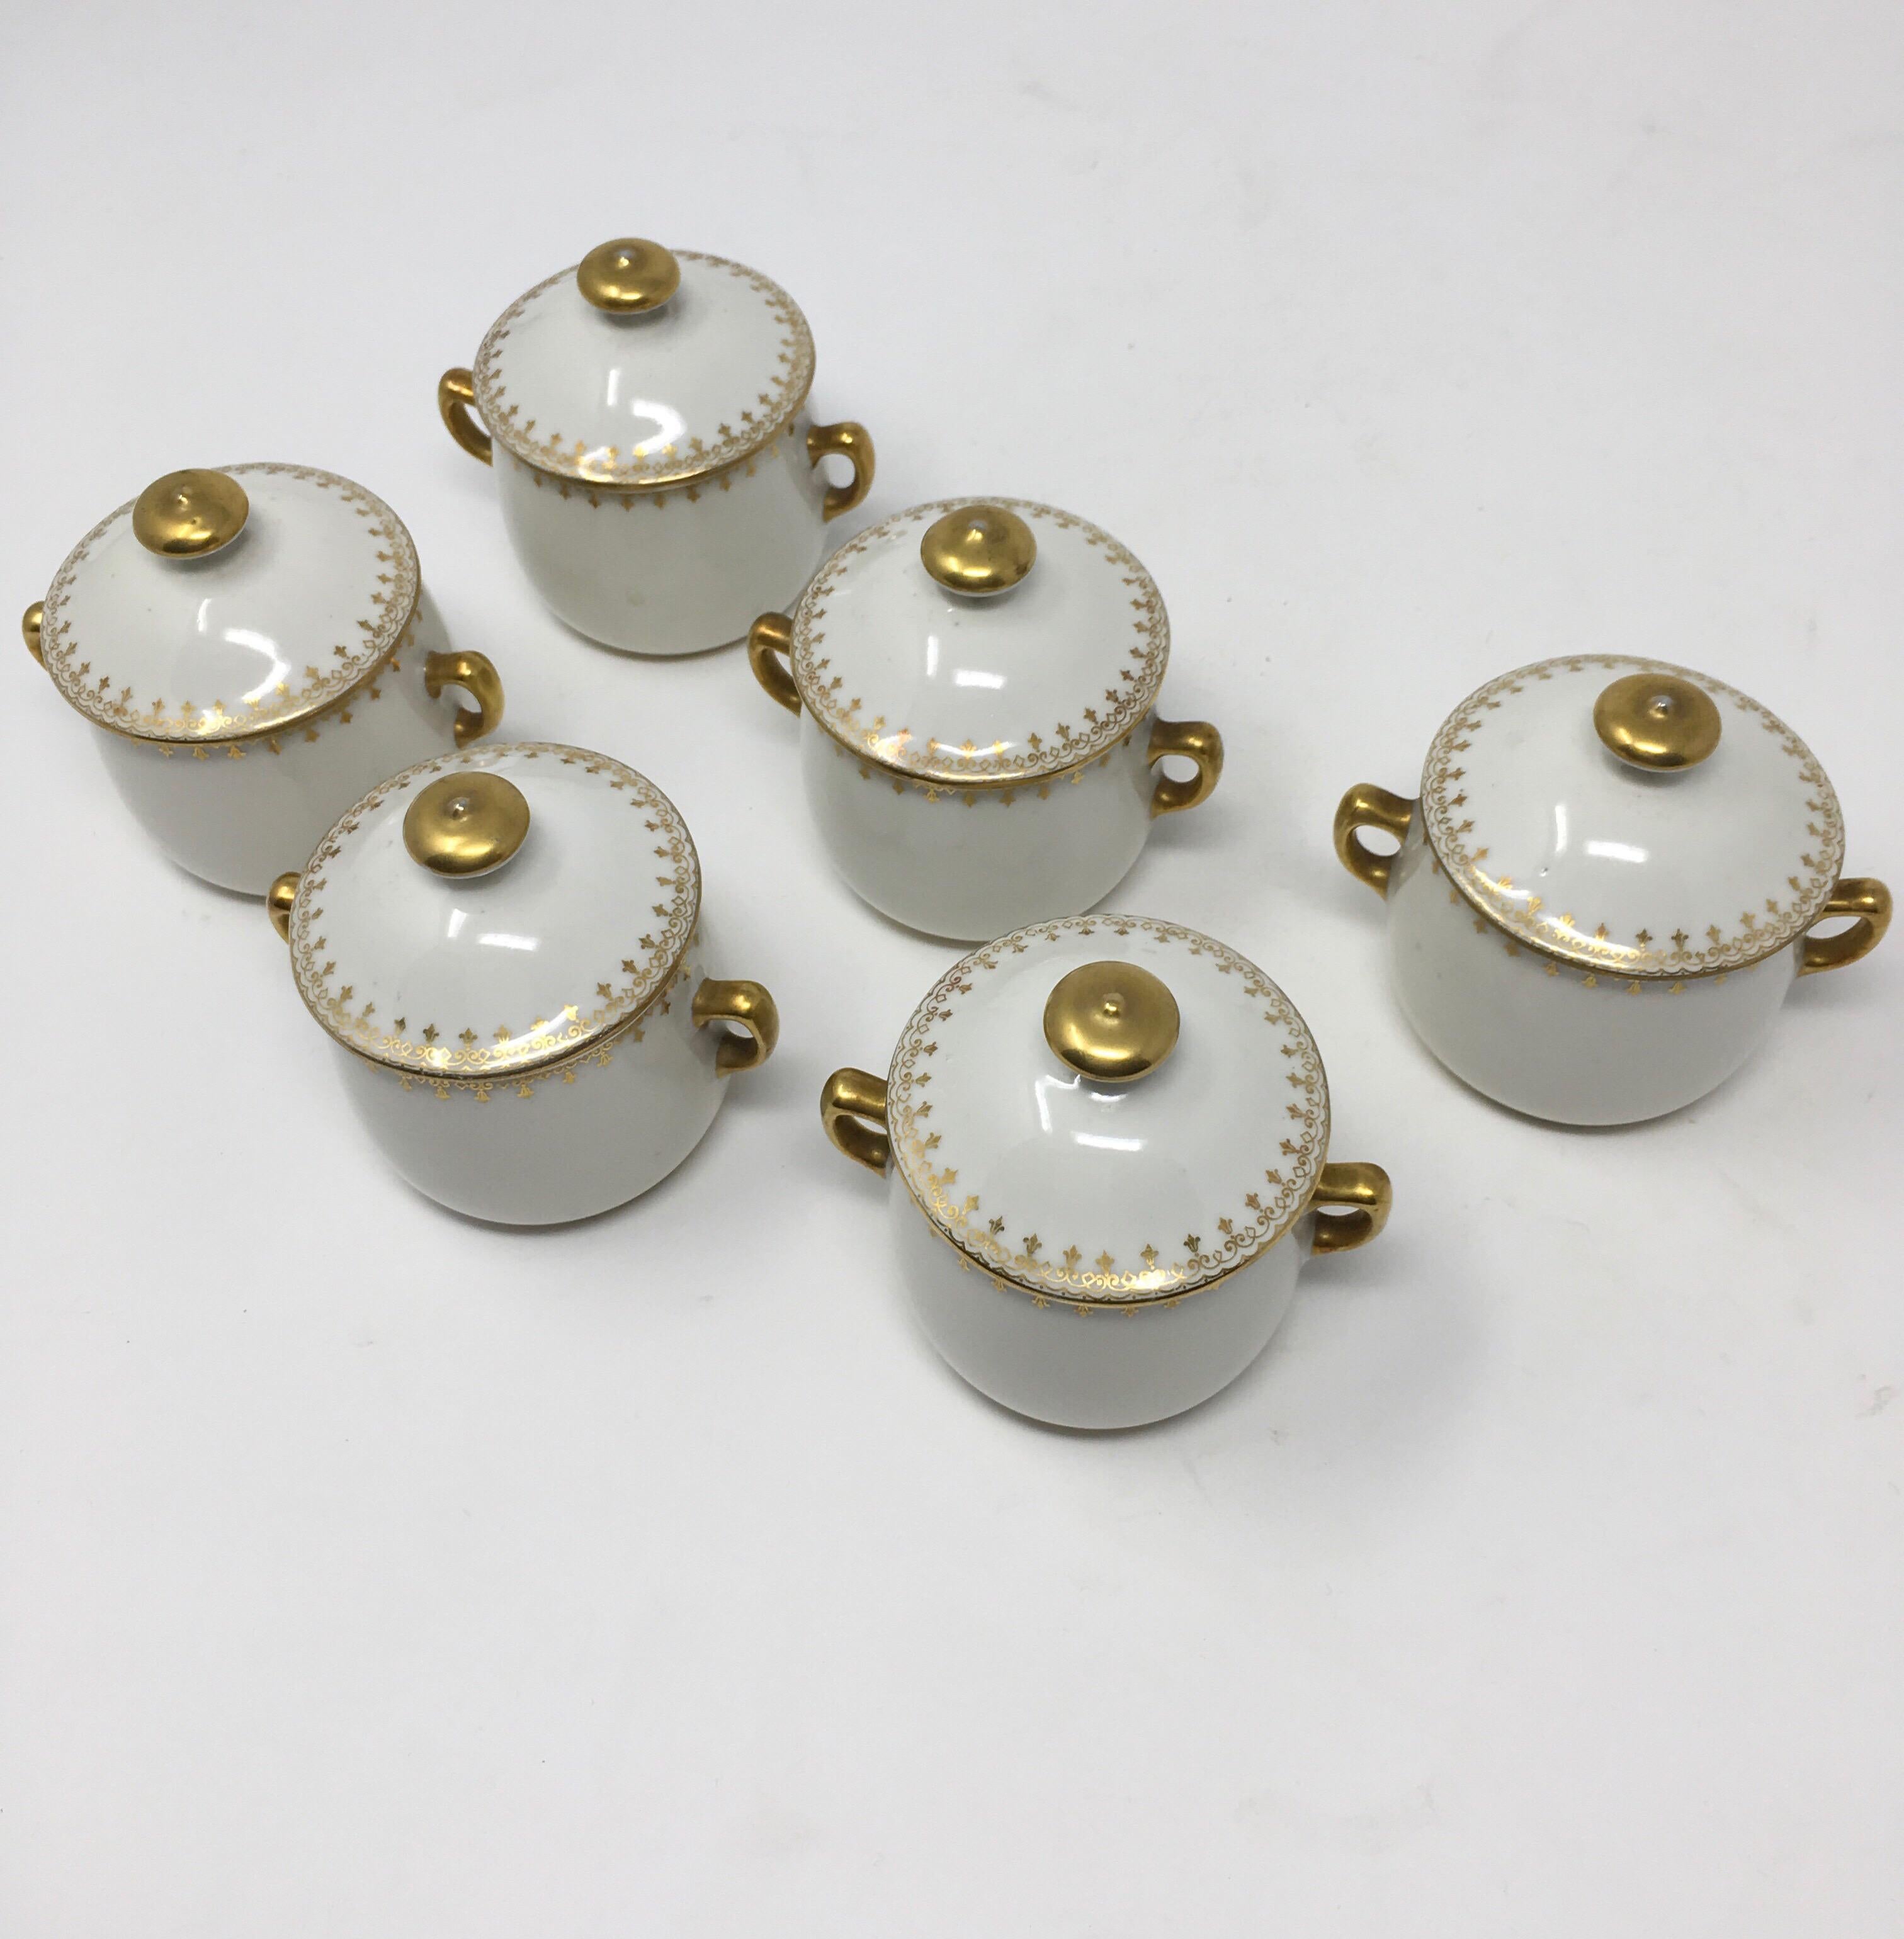 This is a set of six Limoges pots de crème, (cups of cream) with lids. These small cups were used to make and serve a dessert of cold custard. The small pots, (cups) with their own lids were used to protect the custard during baking. A beautiful set